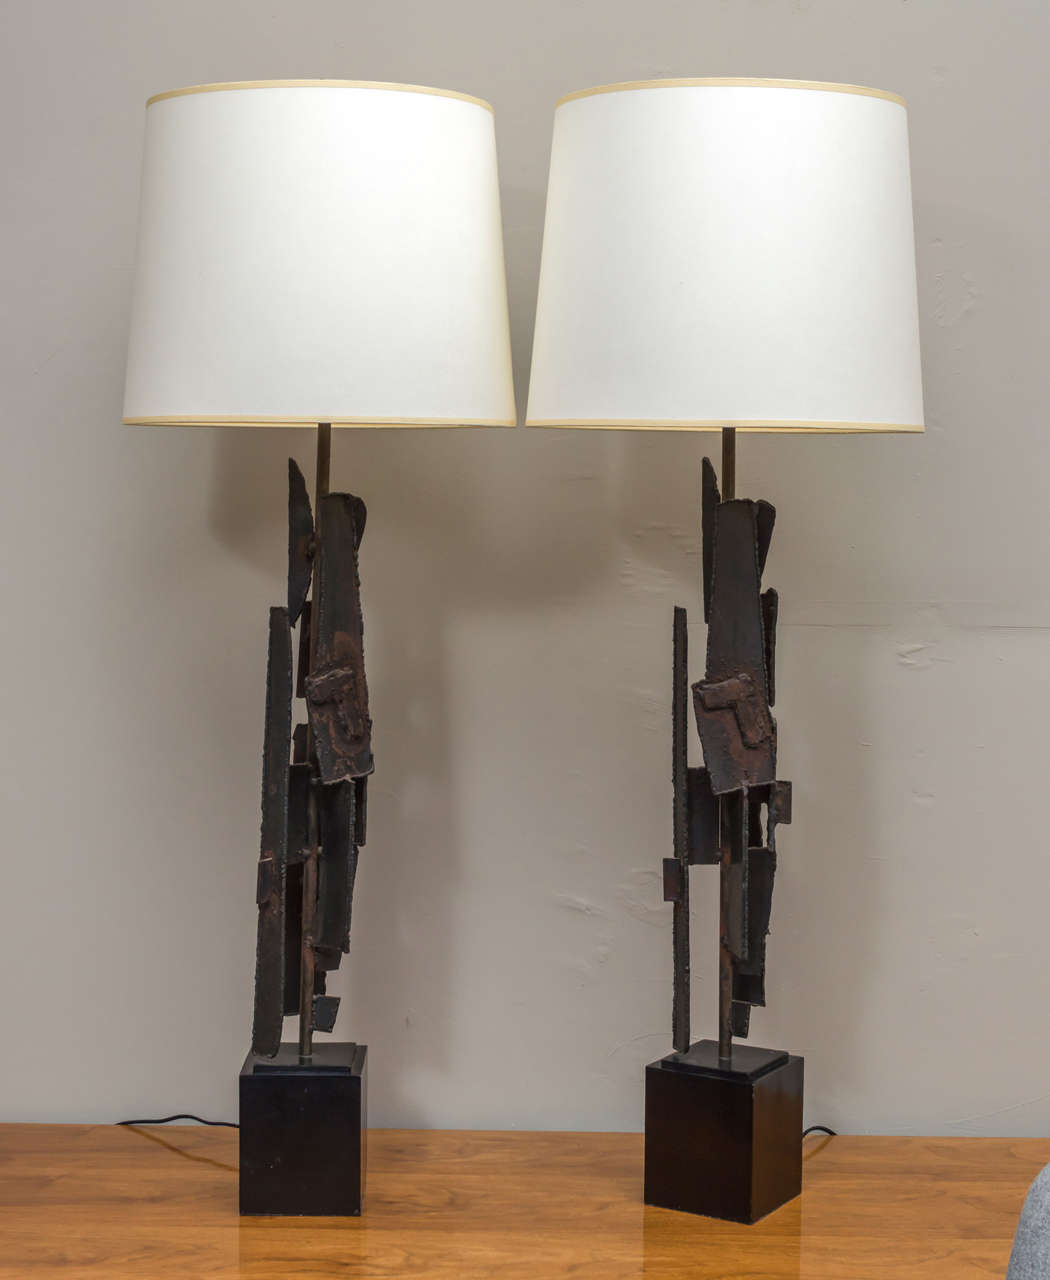 Original pair of brutalist lamps designed by Richard Barr for Laurel Lamp Company.
Newly re-wired in excellent vintage condition.